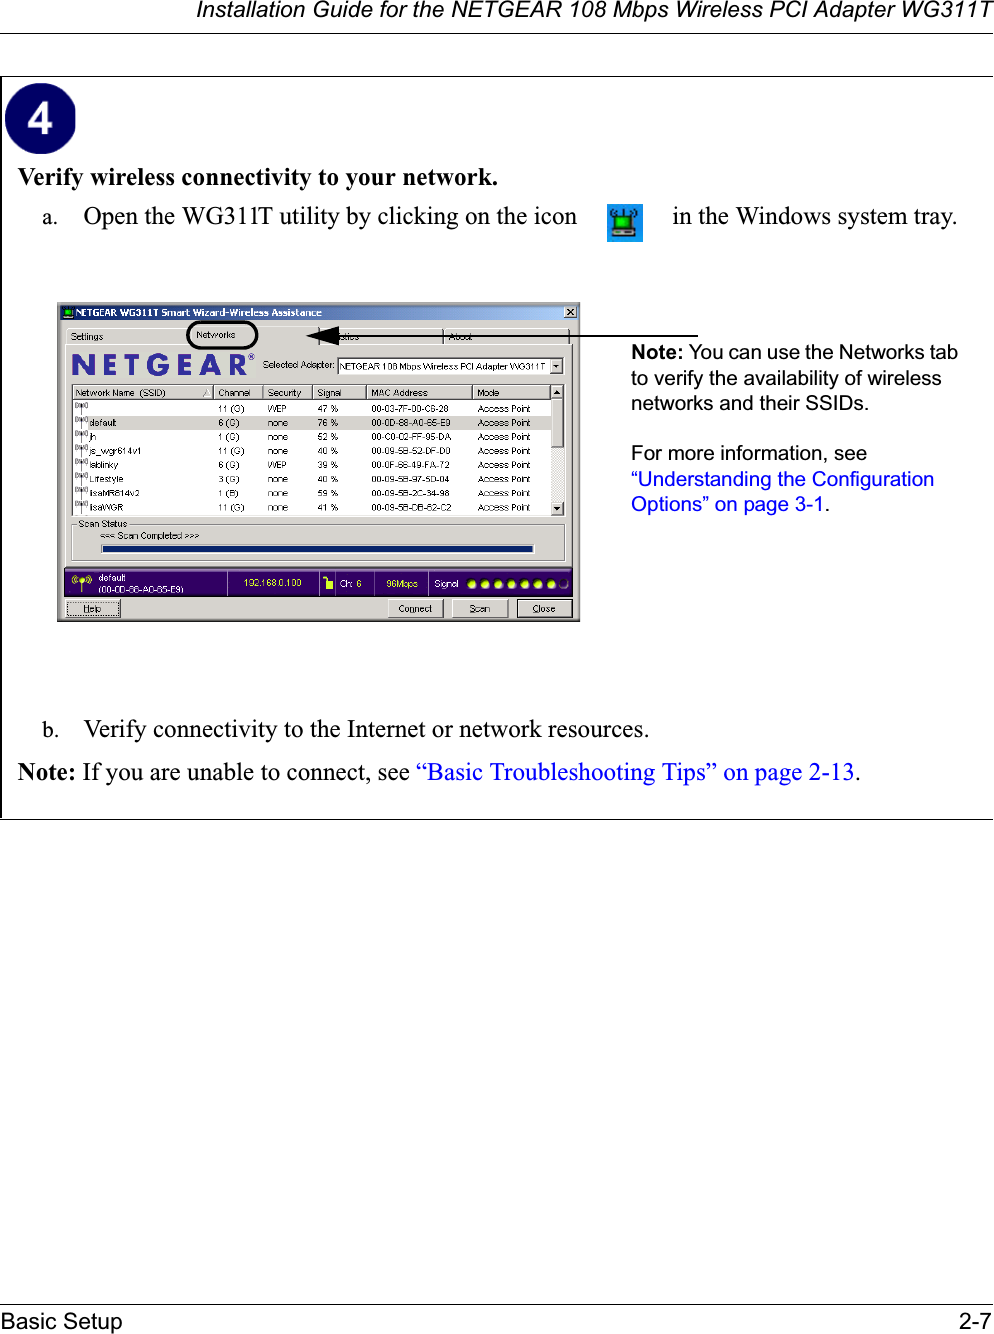 Installation Guide for the NETGEAR 108 Mbps Wireless PCI Adapter WG311TBasic Setup 2-7Verify wireless connectivity to your network.a. Open the WG311T utility by clicking on the icon   in the Windows system tray.b. Verify connectivity to the Internet or network resources.Note: If you are unable to connect, see “Basic Troubleshooting Tips” on page 2-13.Note: You can use the Networks tab to verify the availability of wireless networks and their SSIDs. For more information, see “Understanding the Configuration Options” on page 3-1.